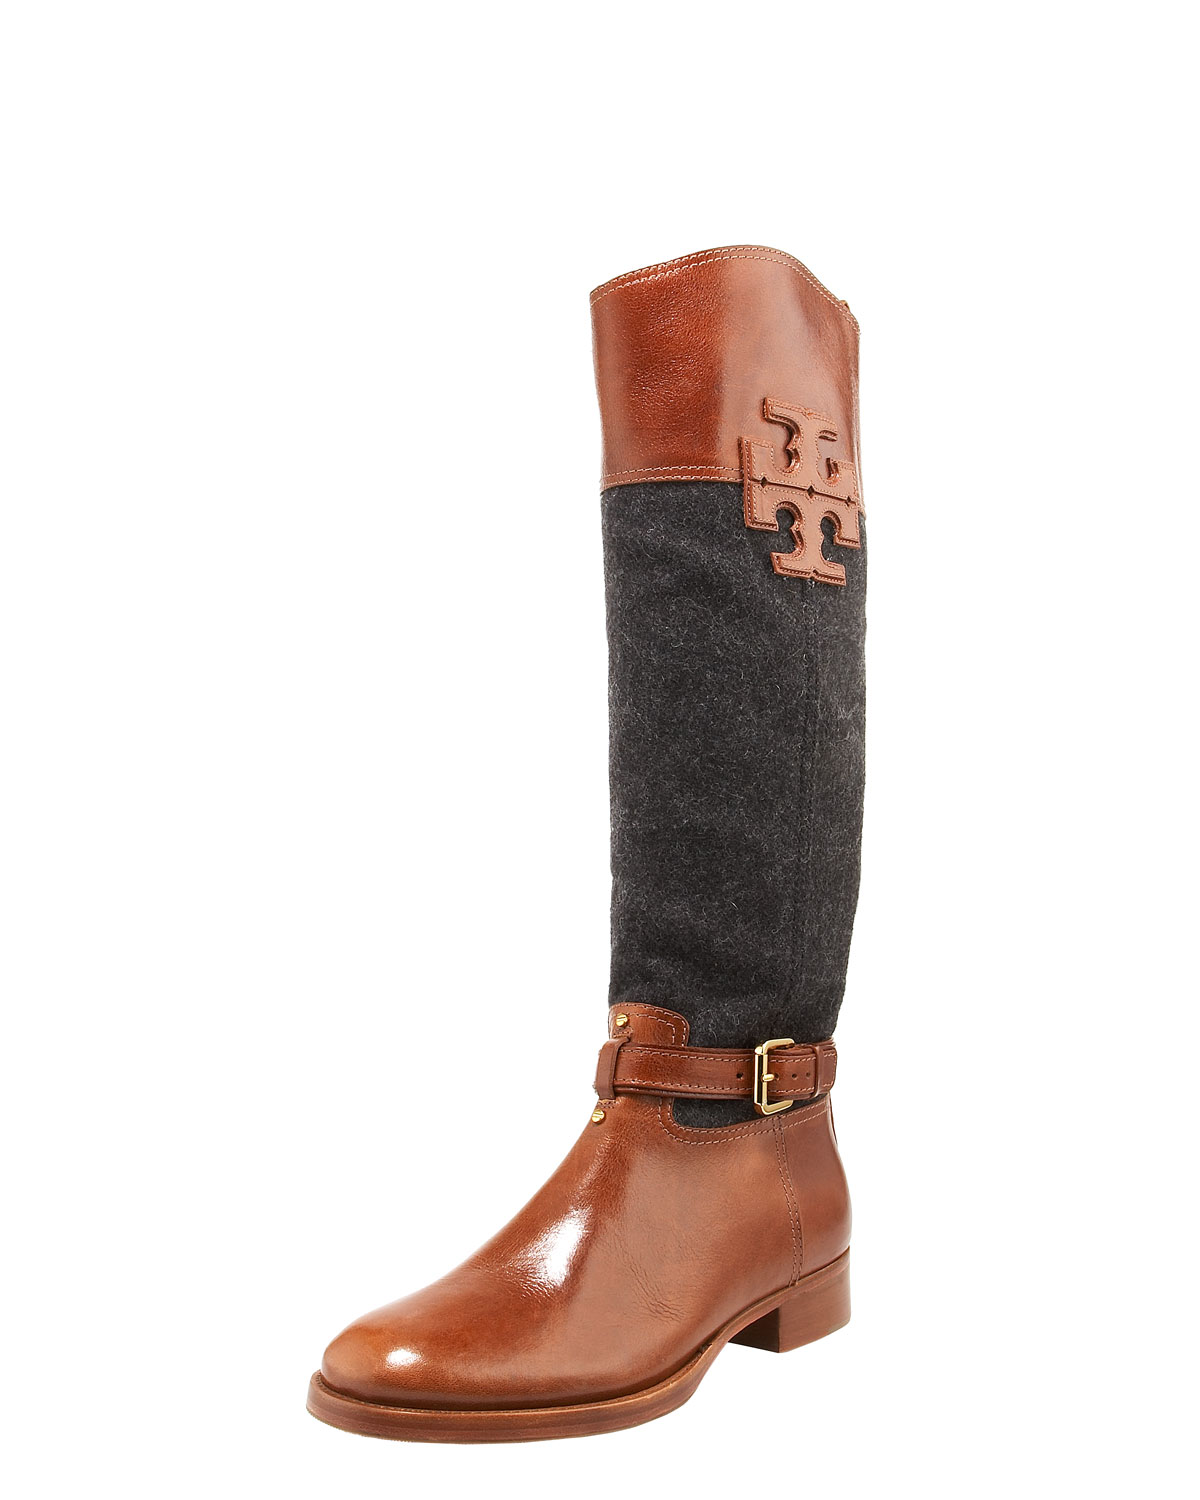 Tory Burch Blaire Leather/flannel Riding Boot in Brown (almond) | Lyst